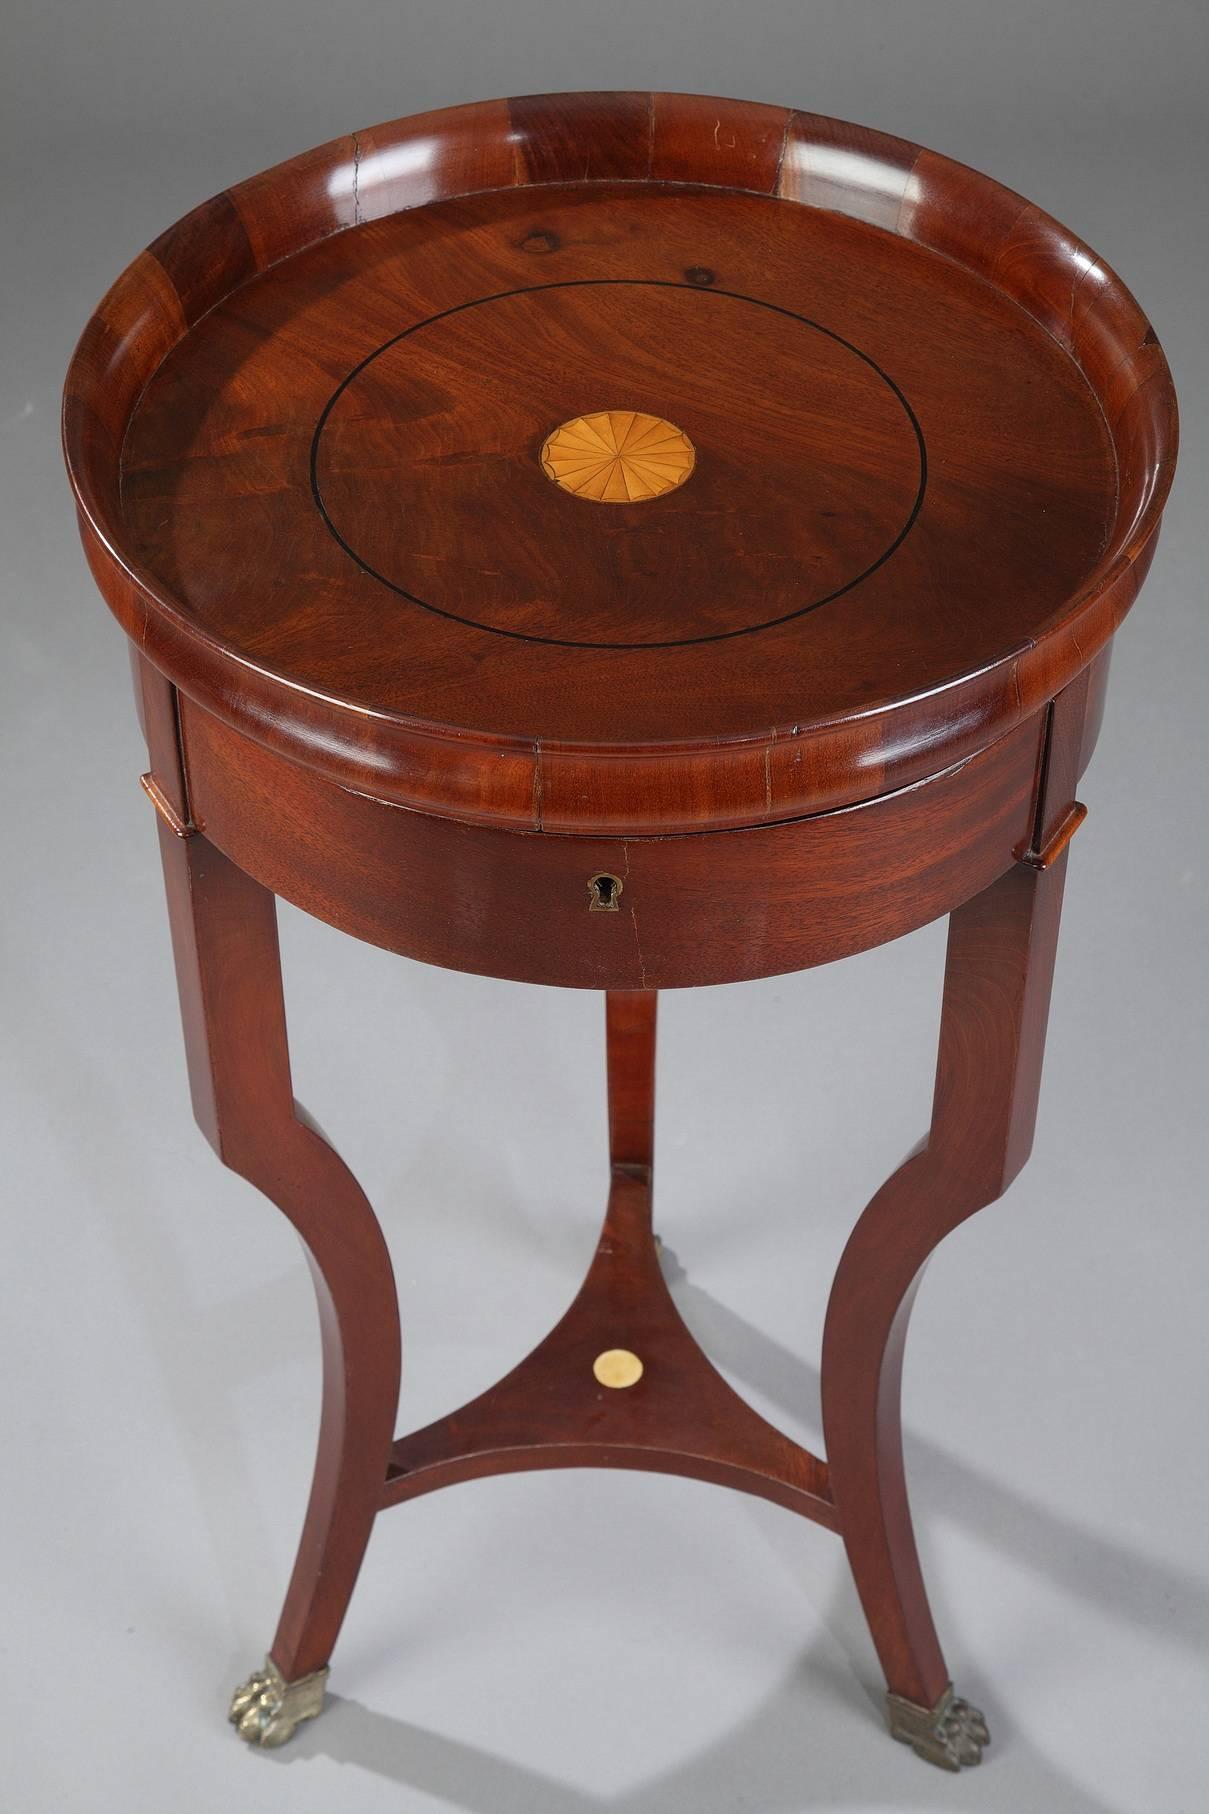 Small work table-jewelry box in mahogany and mahogany veneer with rosette marquetry inlaid lift top. It is provided with a mirror and a fitted compartment inside (H 4 cm). The table is set on three curved claw feet in gilt bronze. Restauration